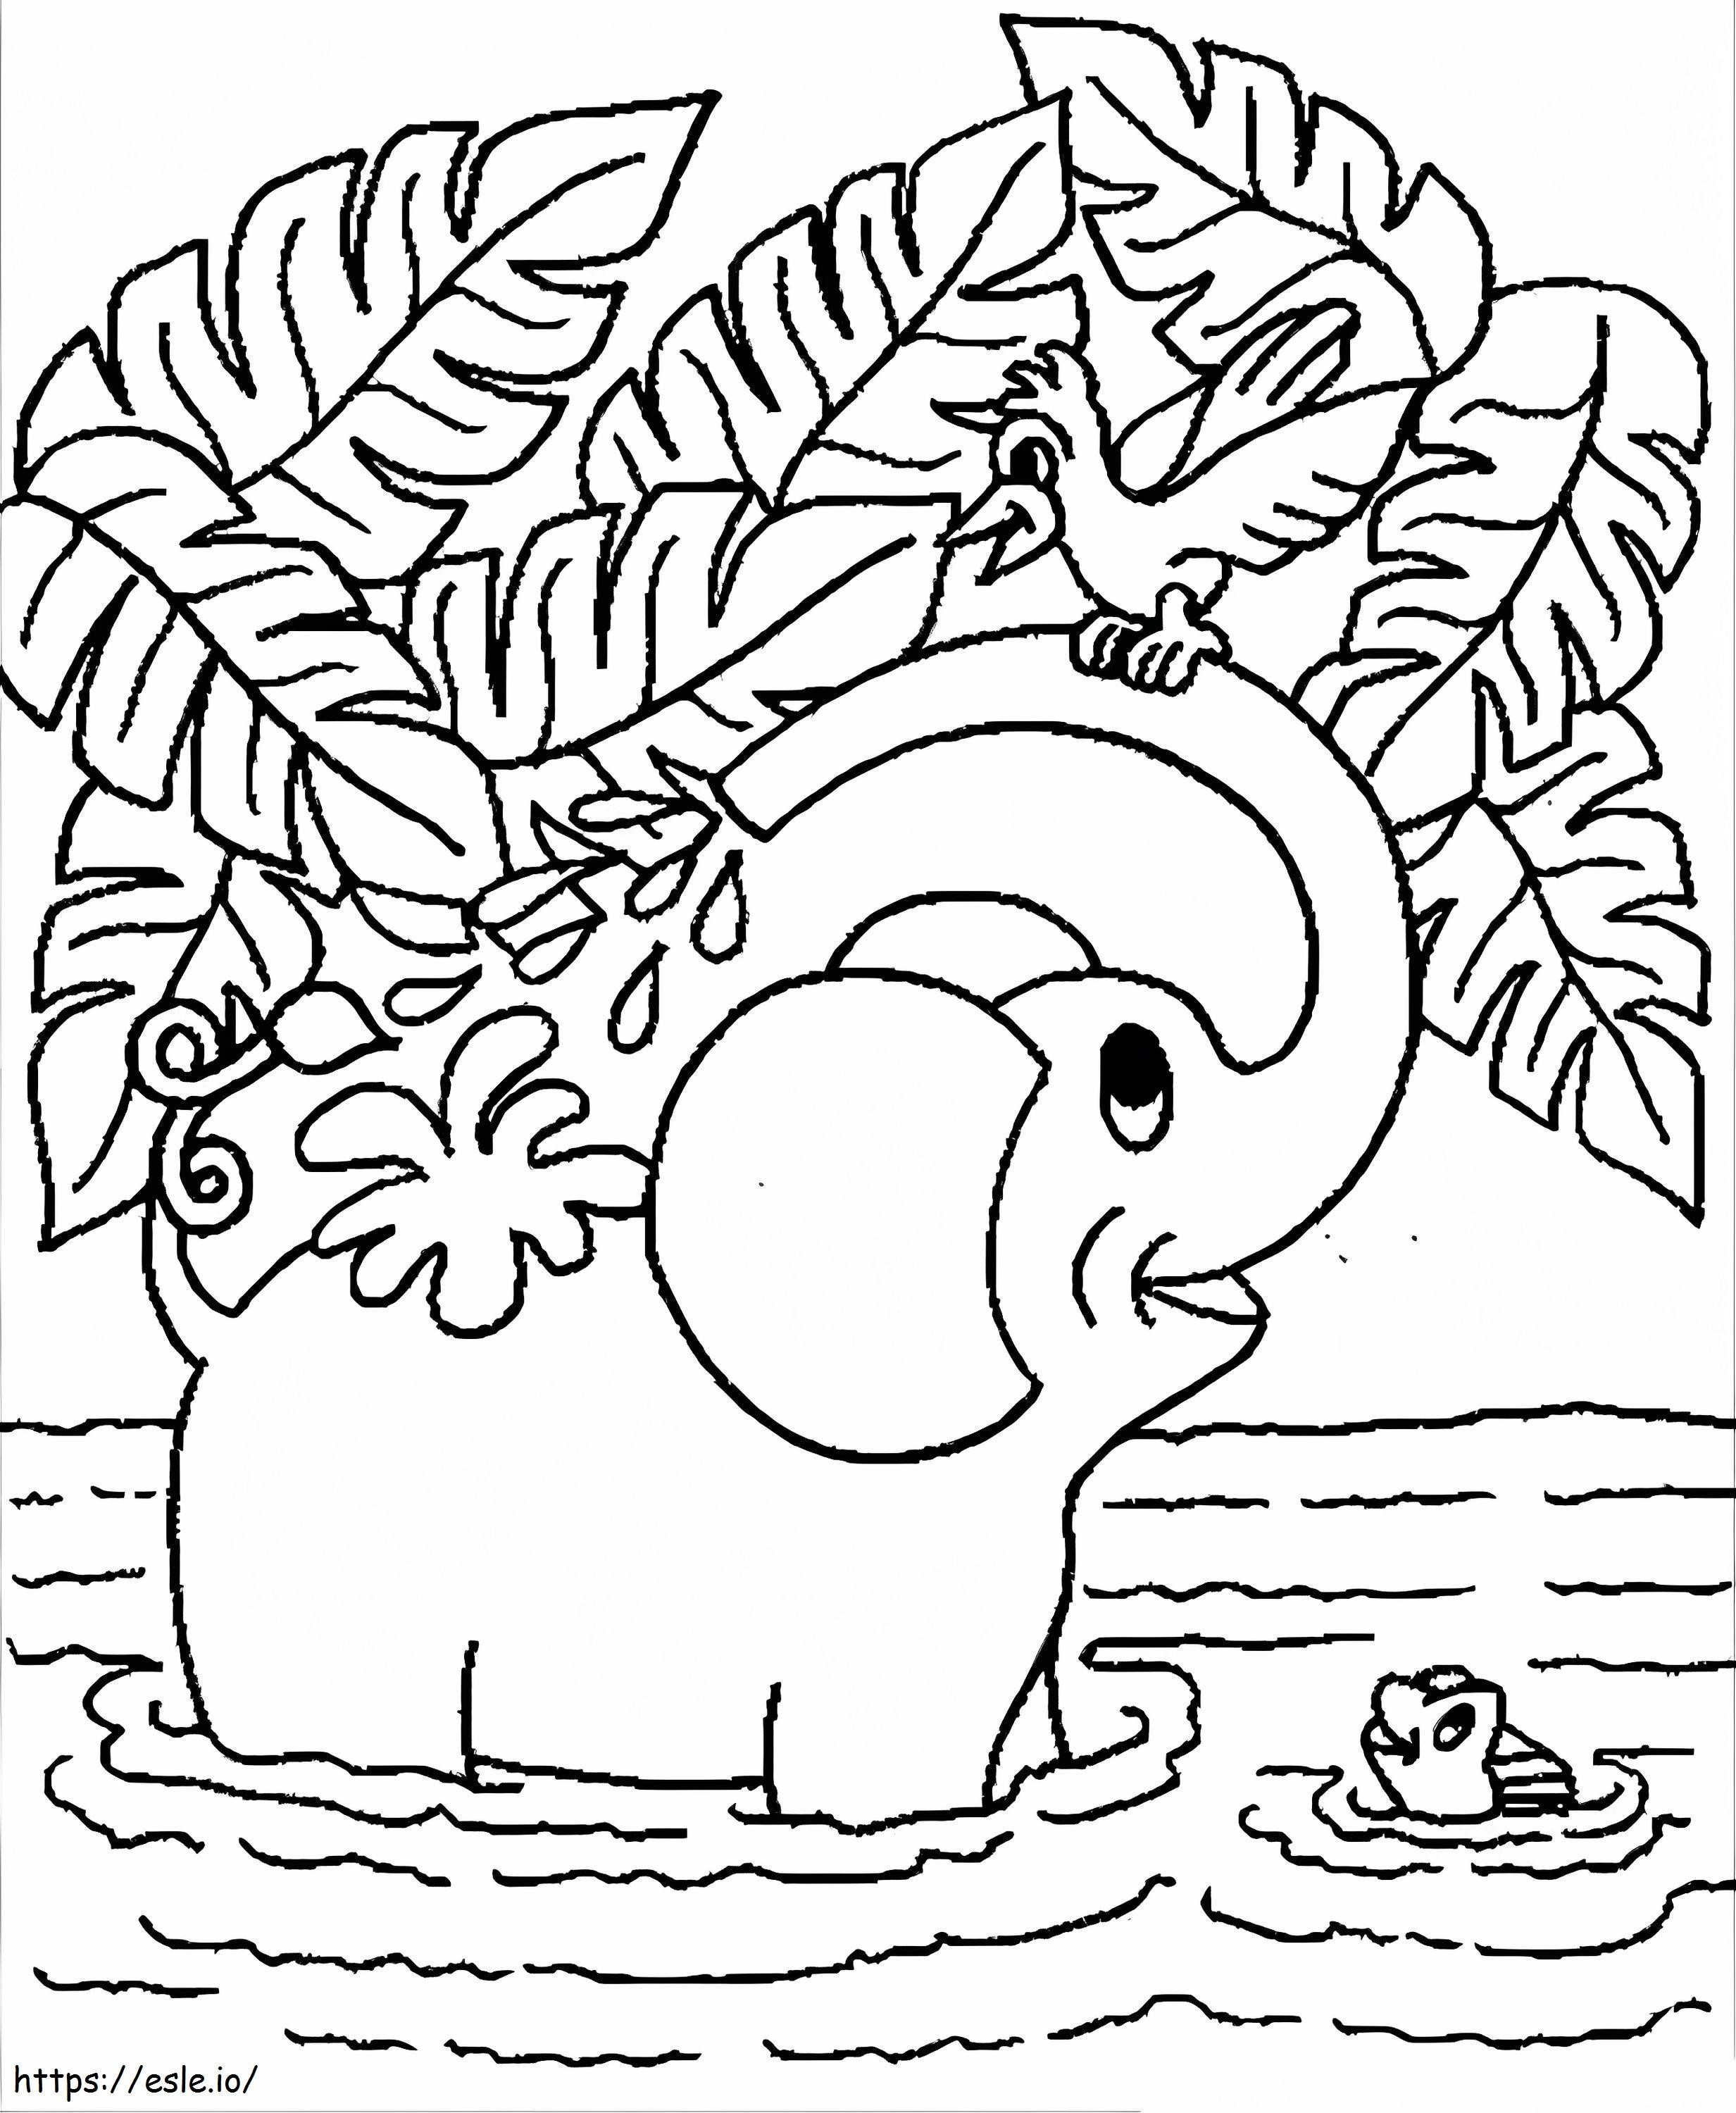 Elephant And Bird coloring page